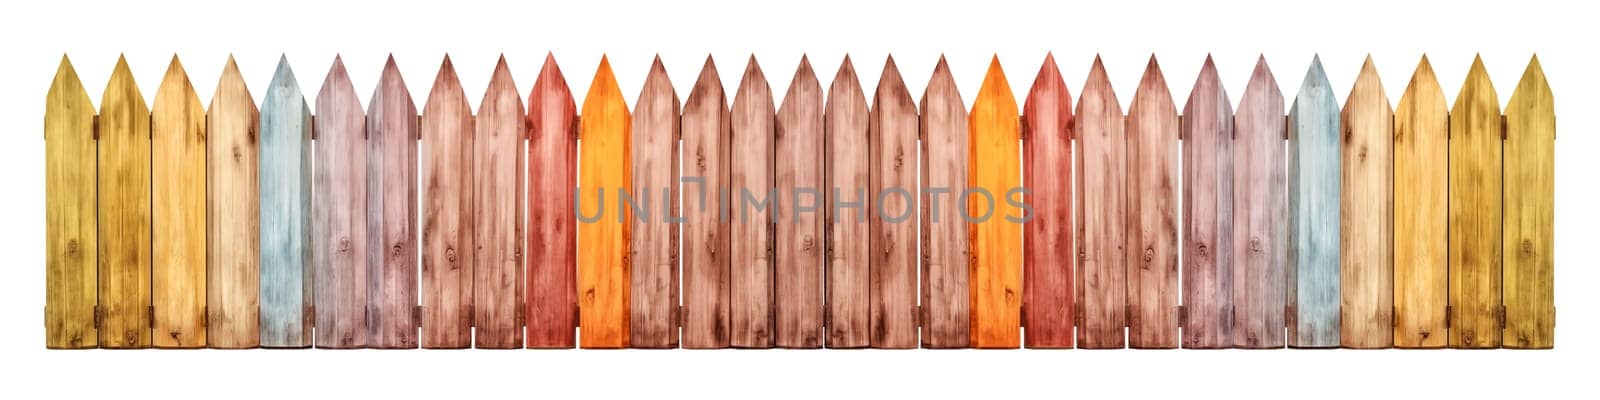 A set of various wooden fences on a transparent background, featuring long strips of wooden fences painted in different colors. The fencing is designed in a style reminiscent of a kindergarten